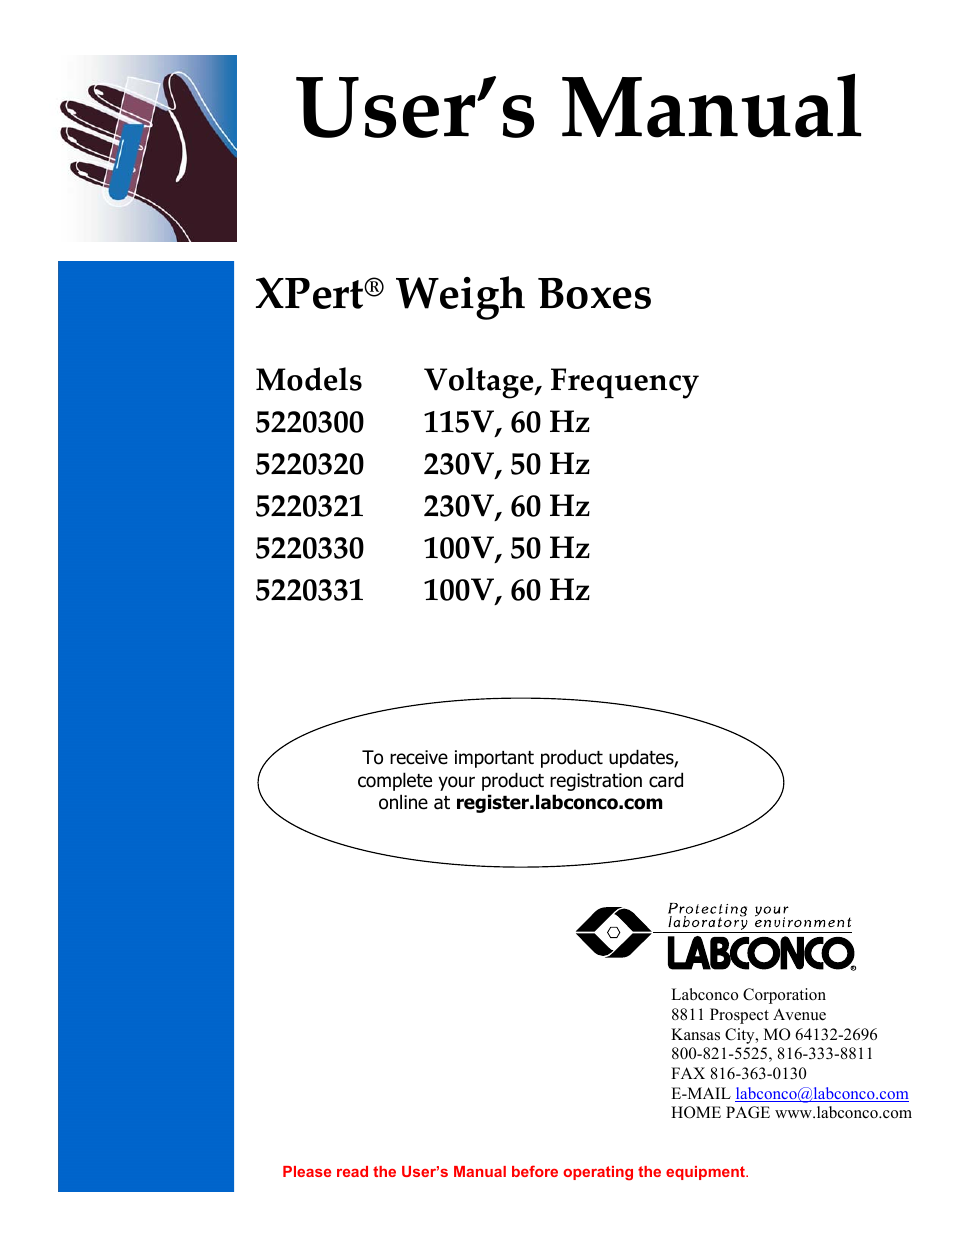 XPert Weigh Boxes 5220300